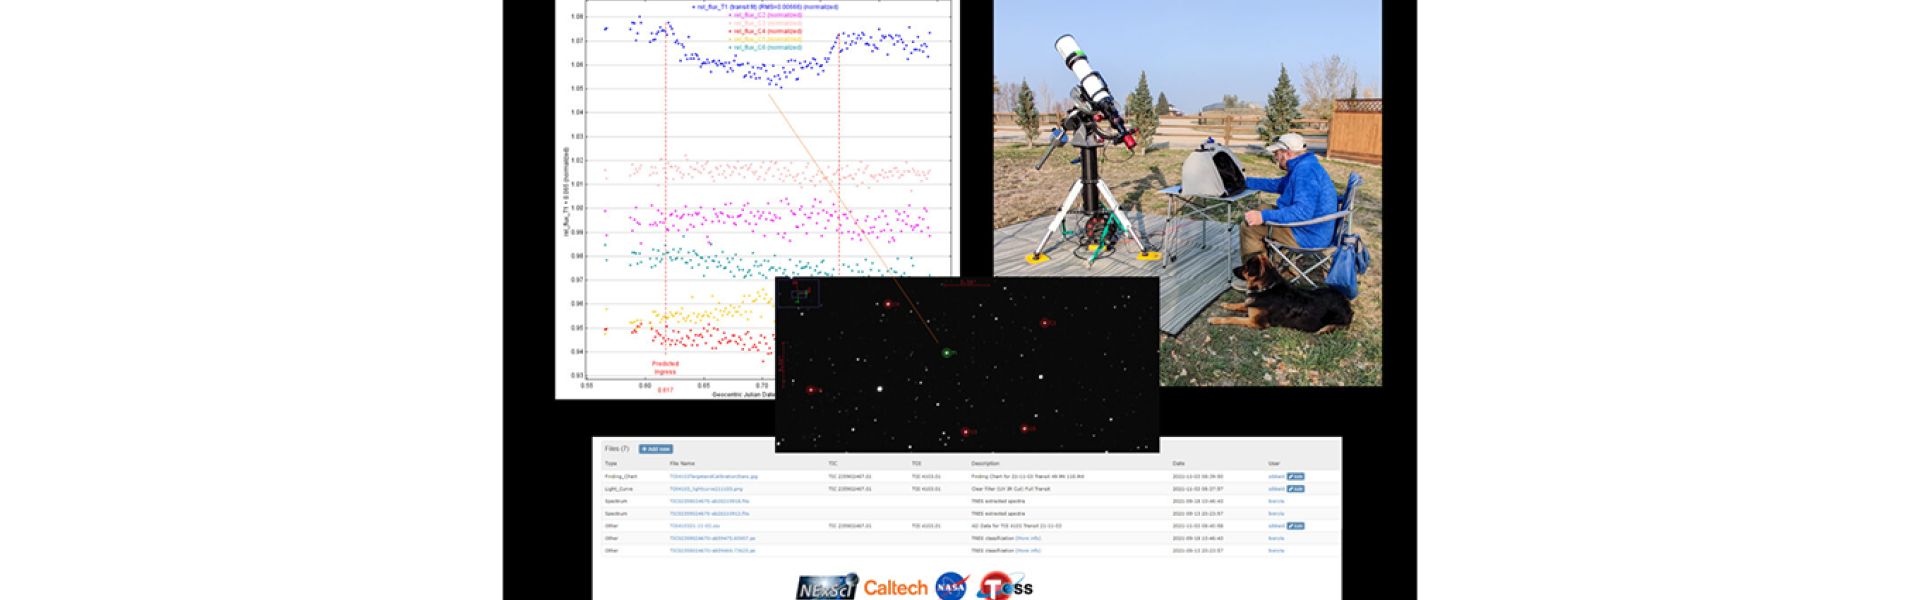 Exoplanet hunting from home